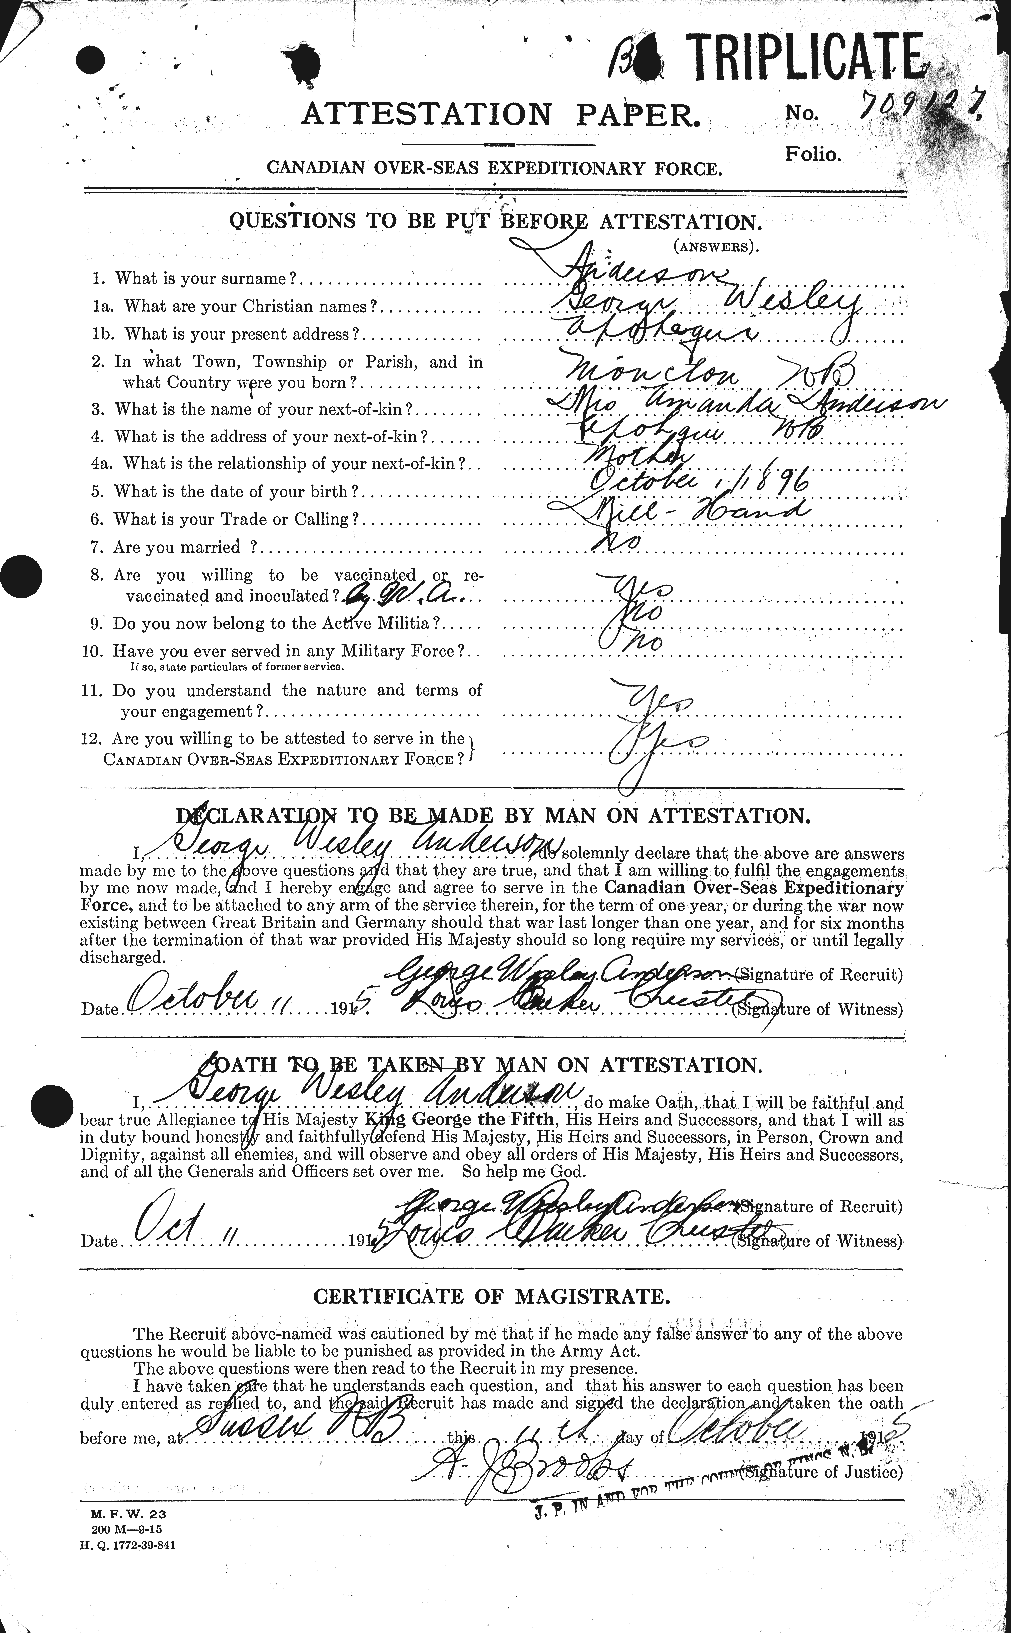 Personnel Records of the First World War - CEF 209688a